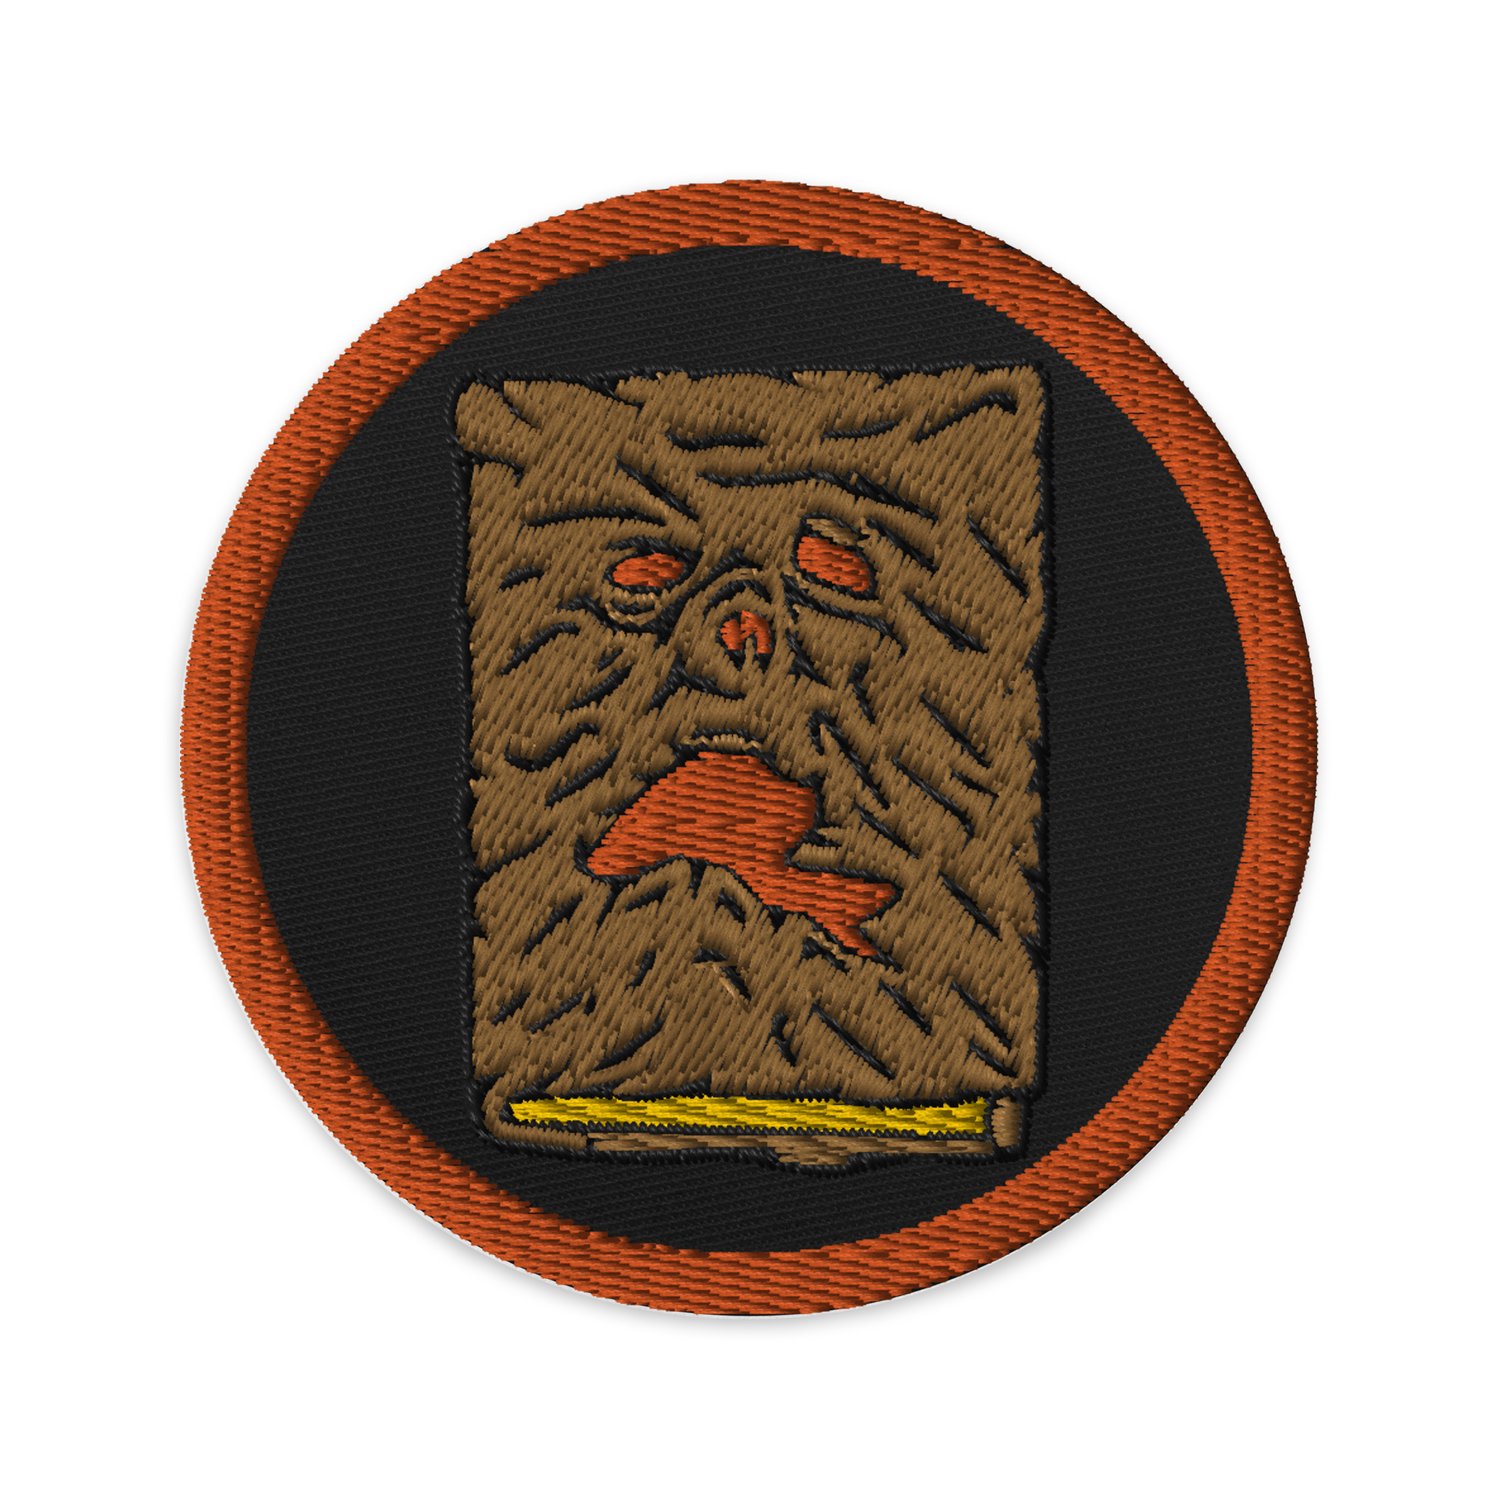 Image of The Book embroidered patch